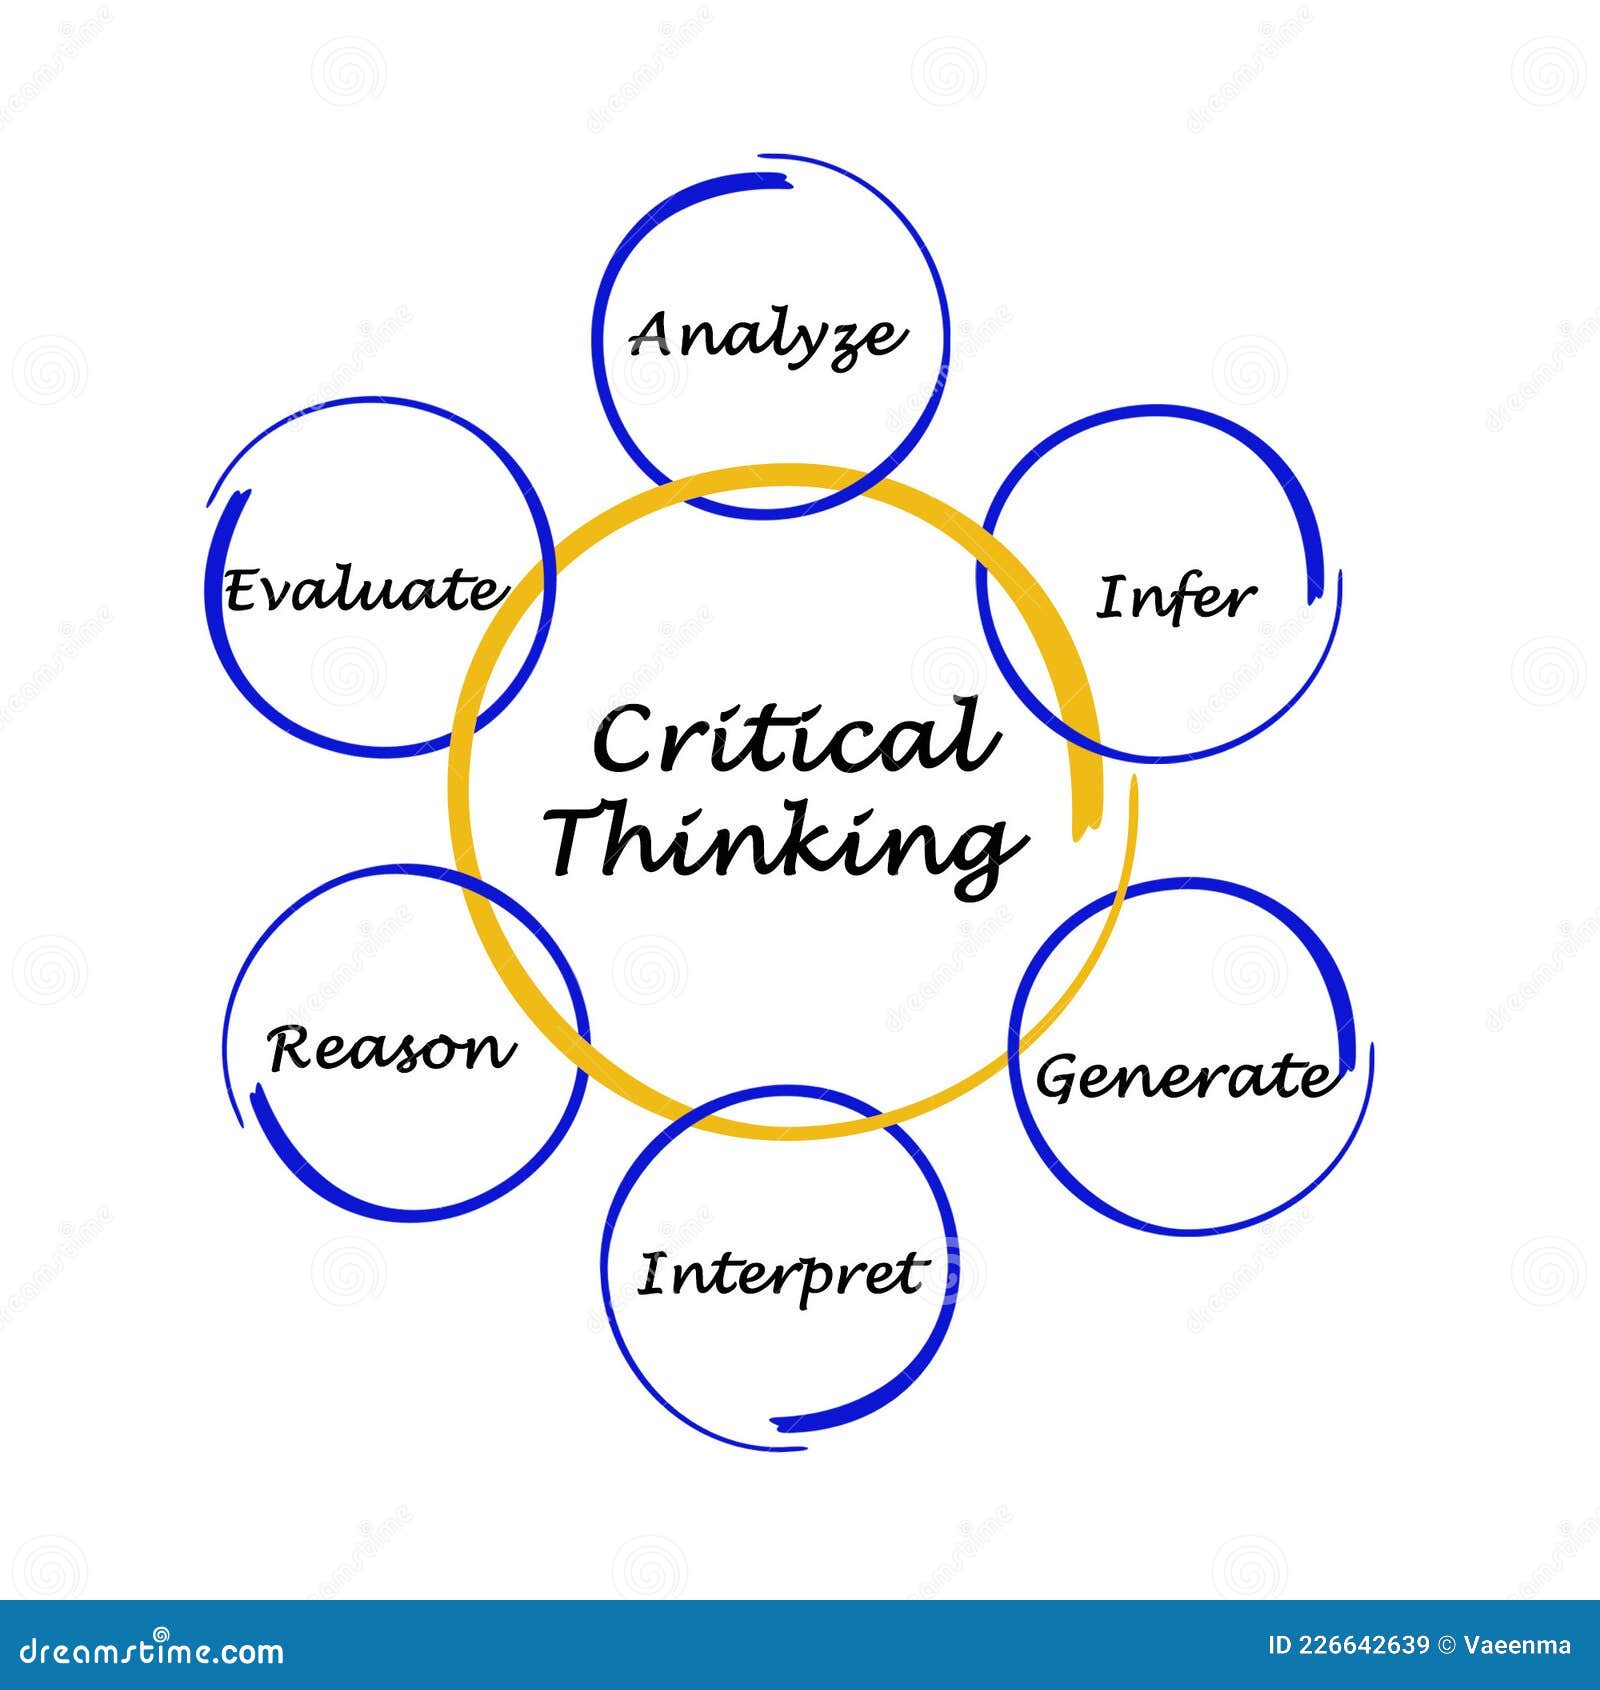 components of critical thinking in